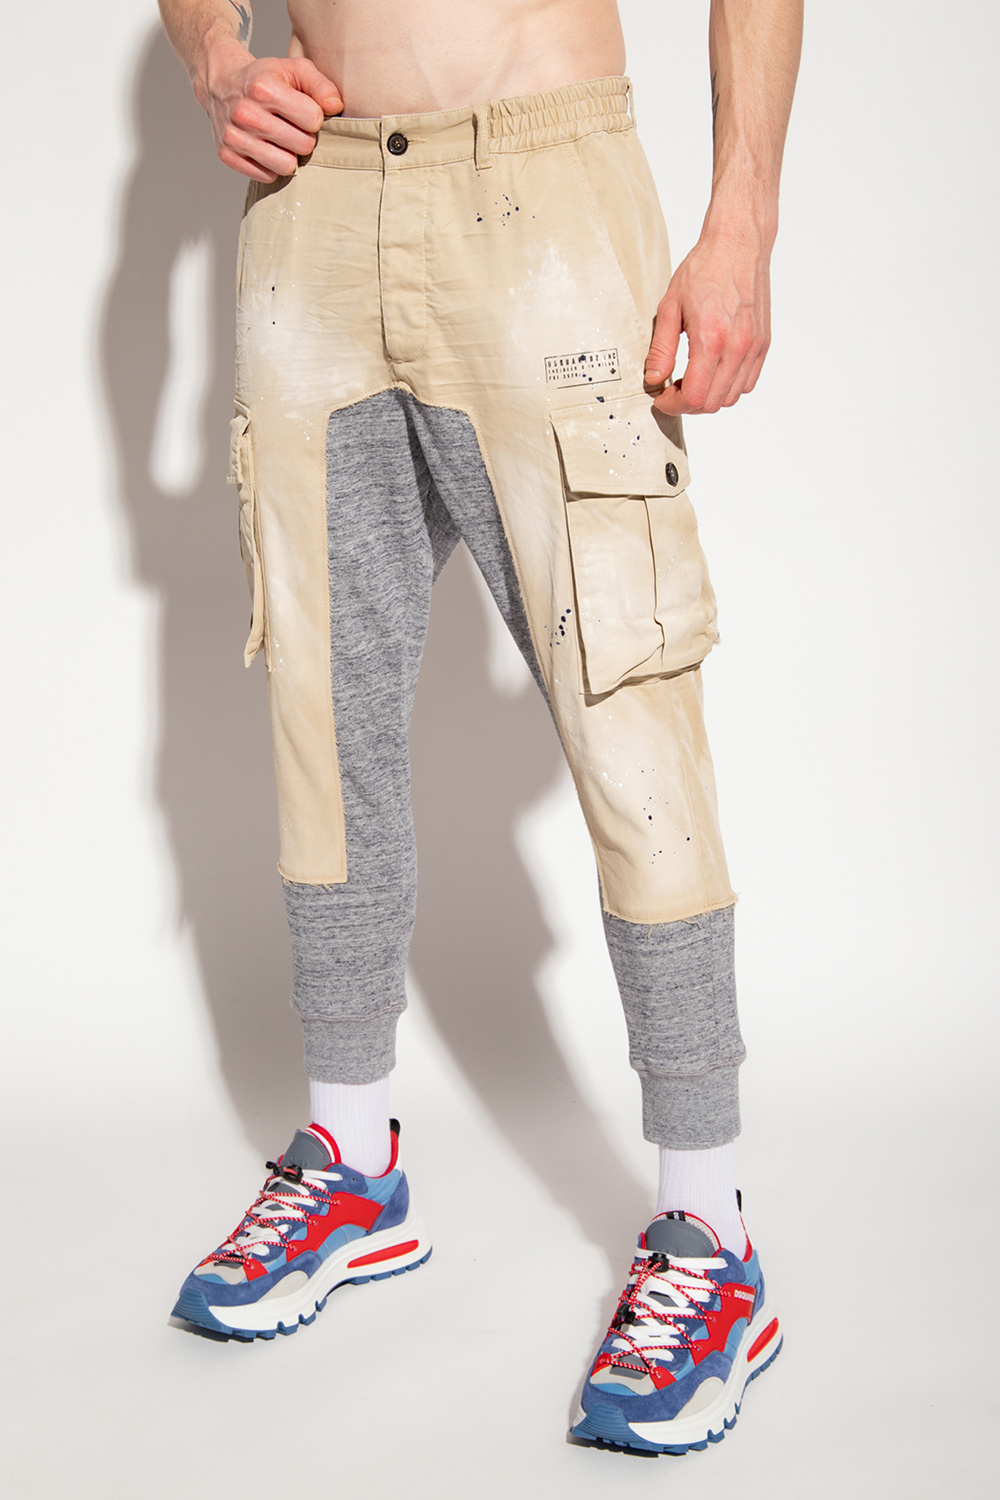 DSQUARED² Cyprus Stretch Cotton Twill Cargo Pants for Men